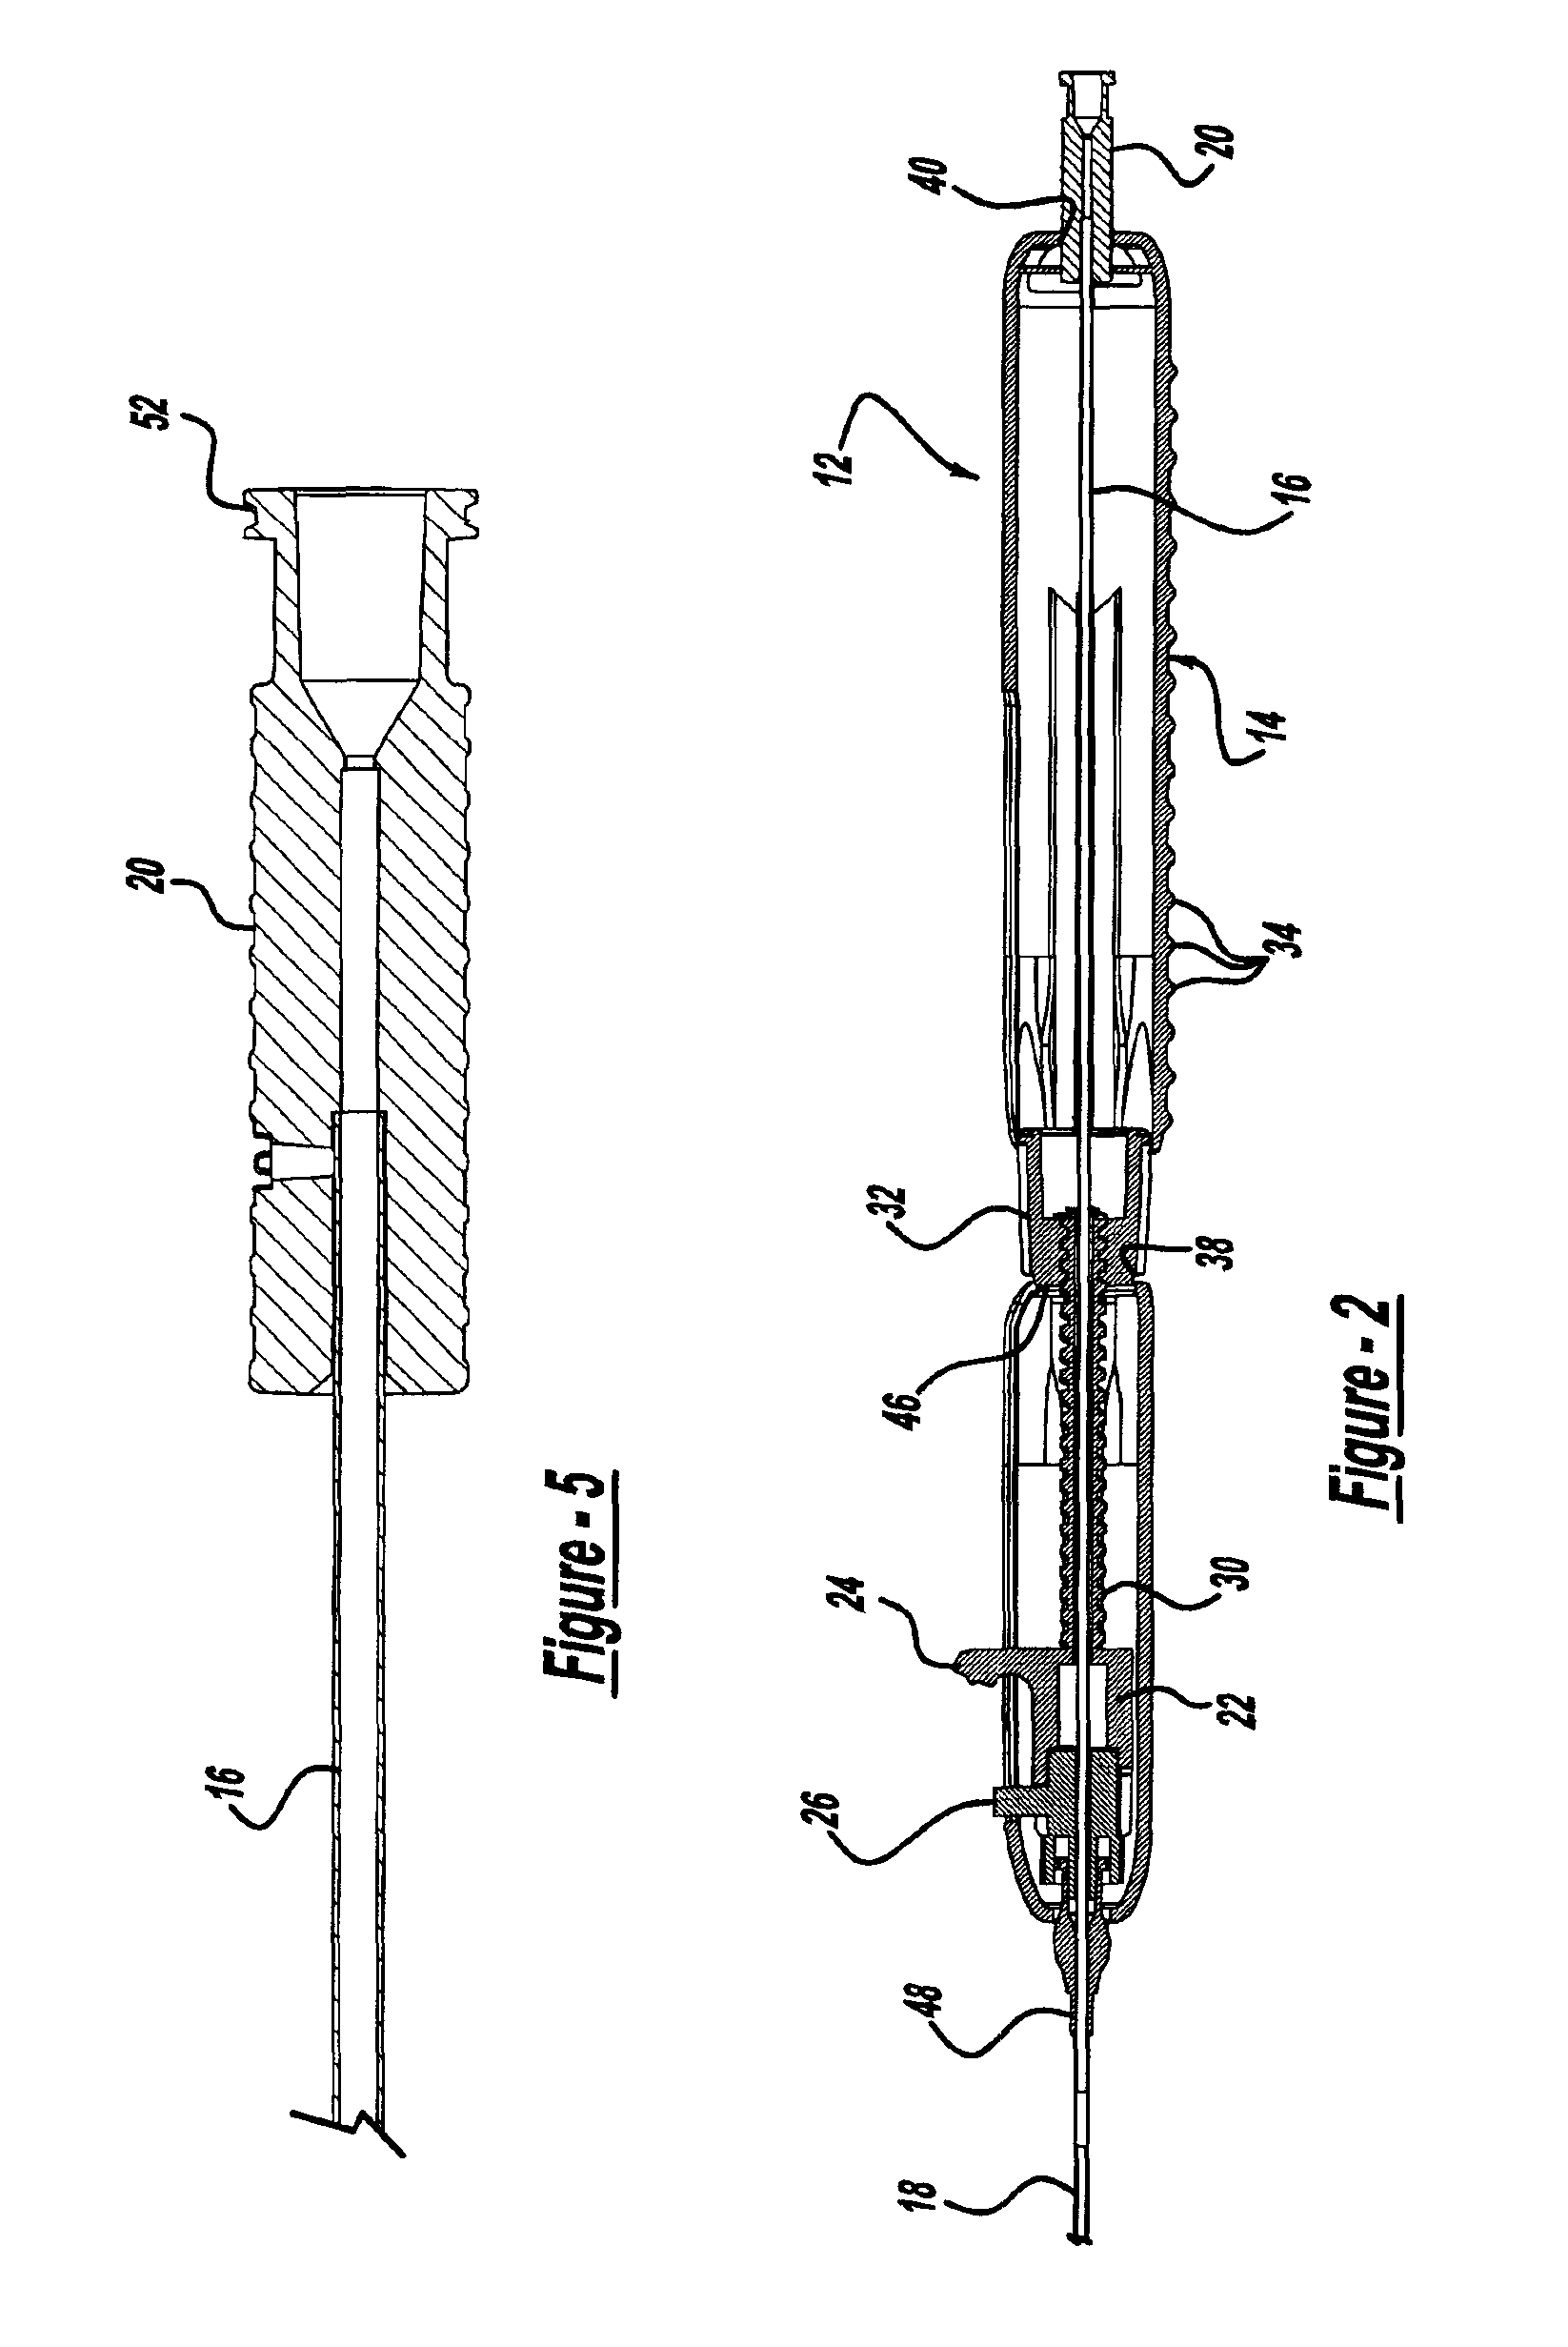 Locking handle deployment mechanism for medical device and method